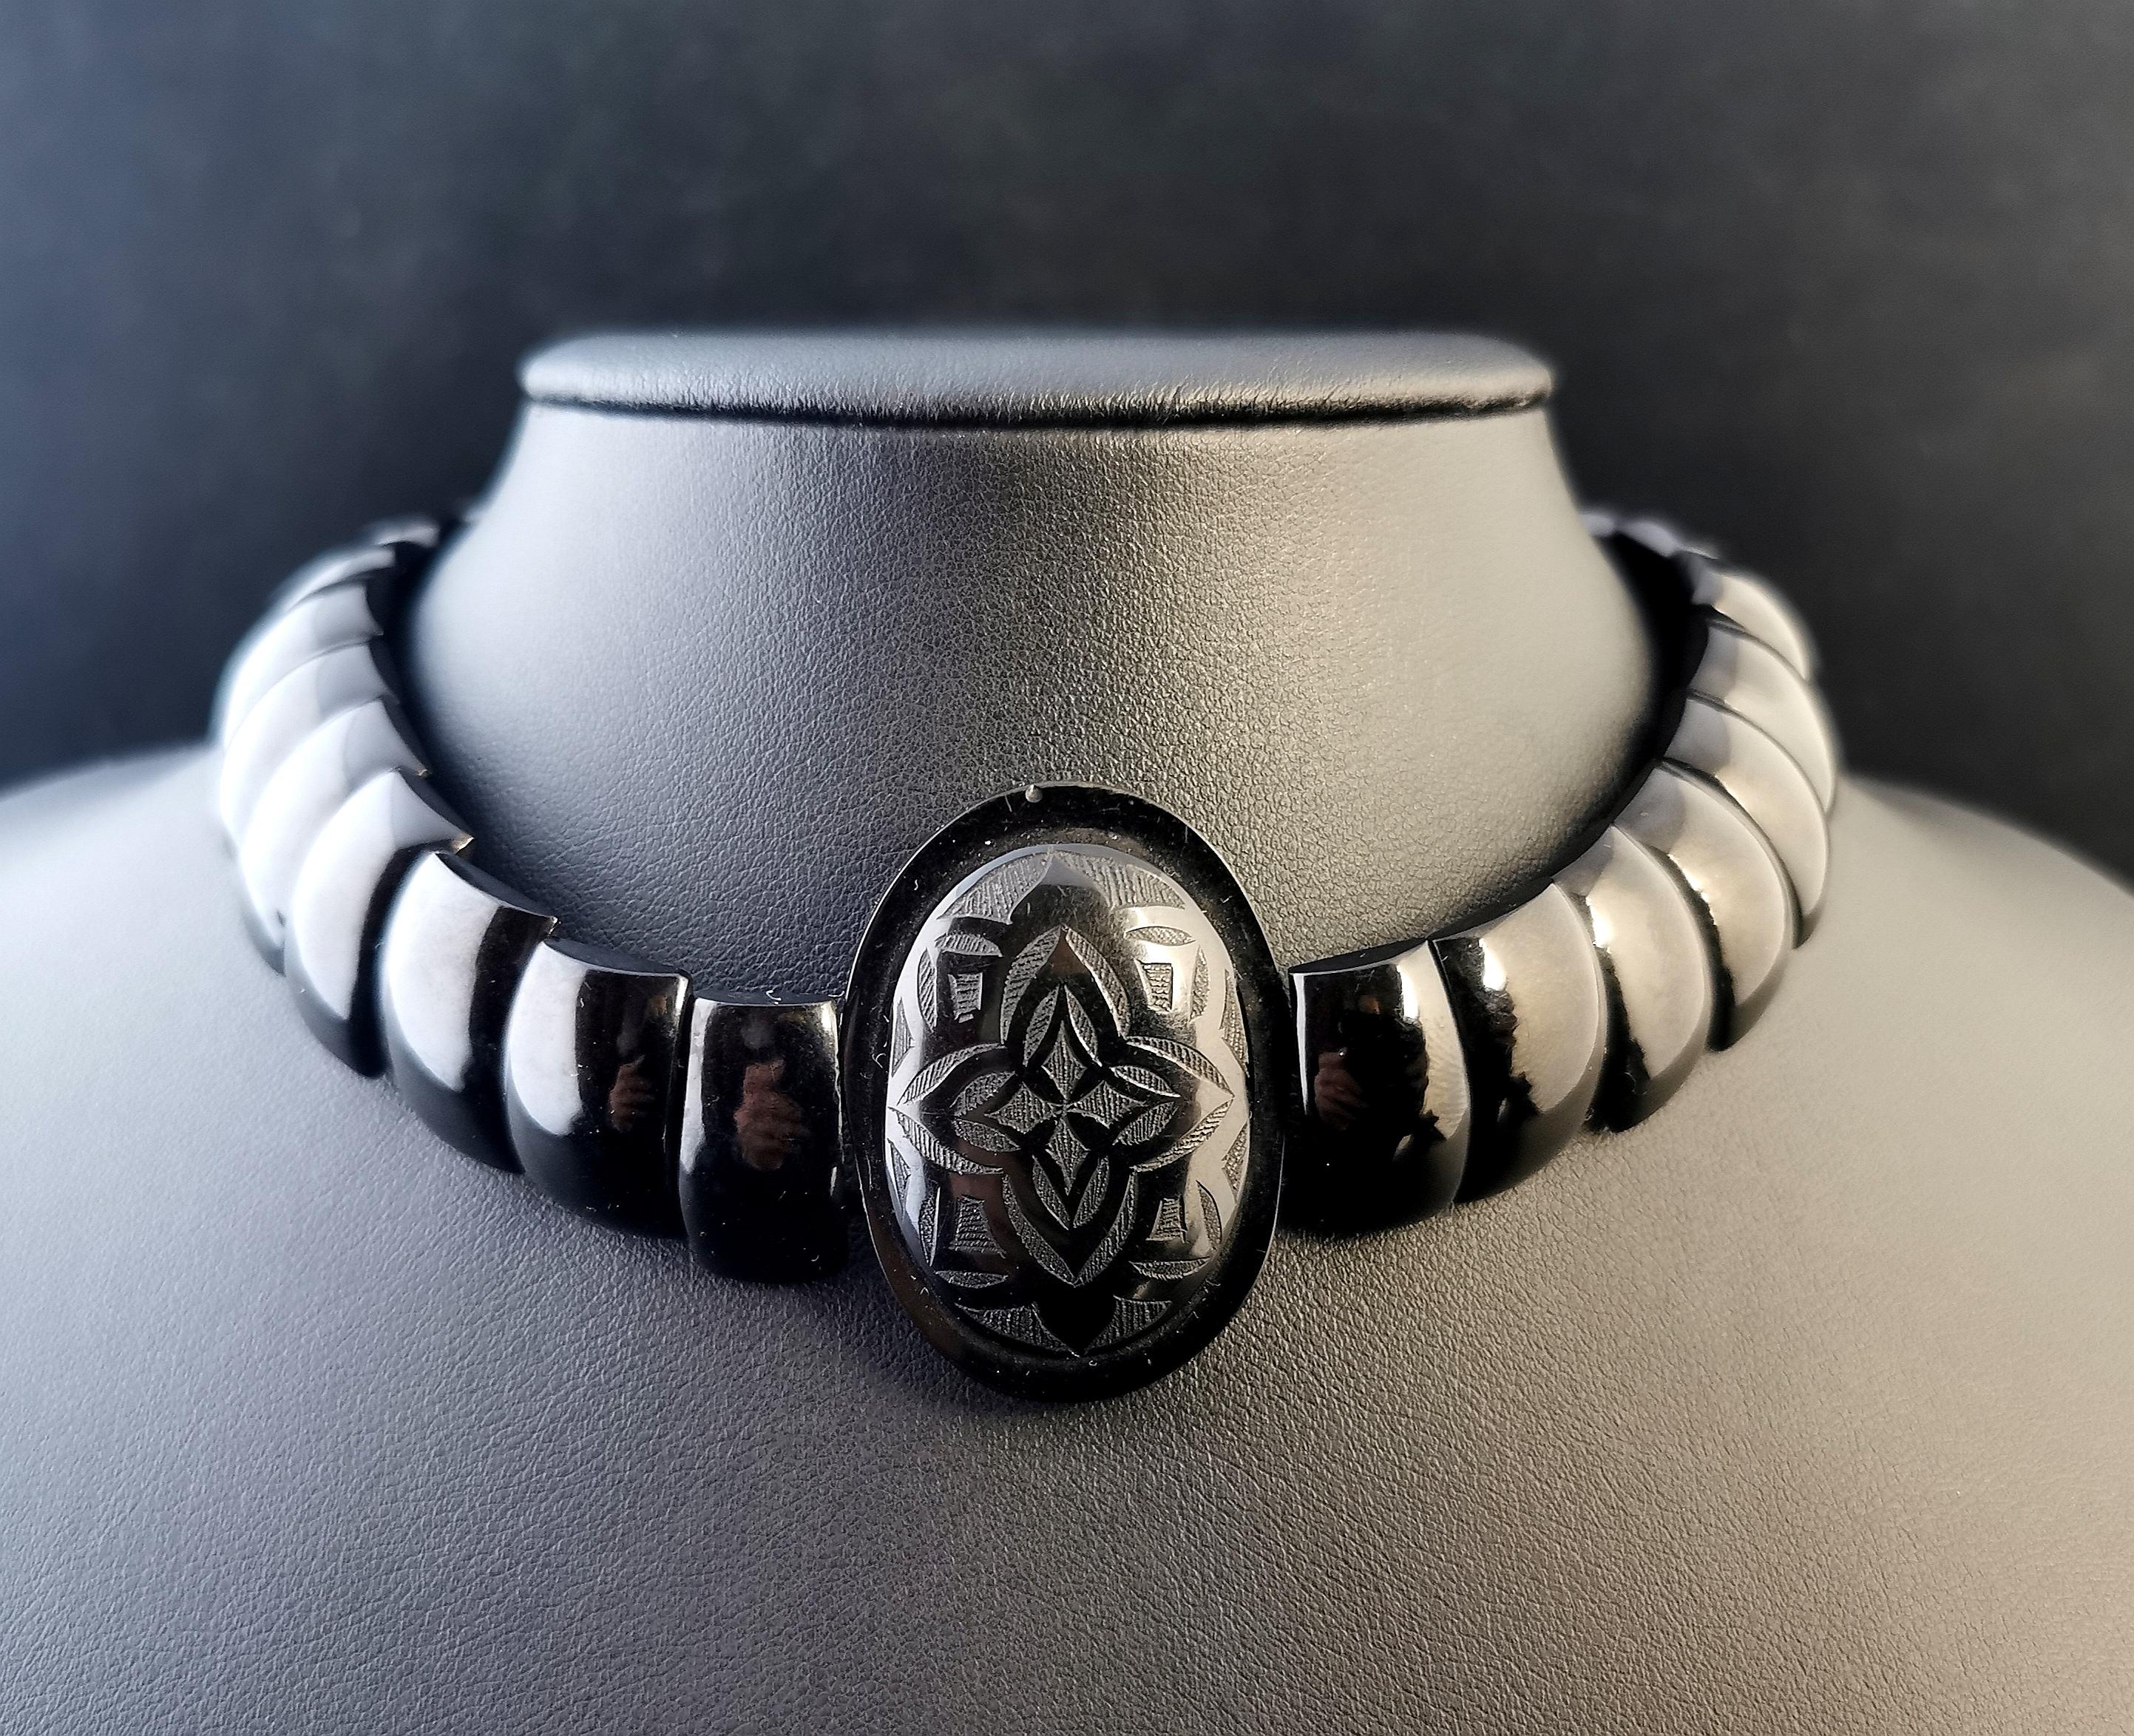 A stunning antique Victorian era Whitby Jet choker necklace.

It is made up from high polished rectangular, domed Whitby Jet beads with a large engraved centre pendant bead with an Arts and Crafts style design.

It fastens with a black japanned